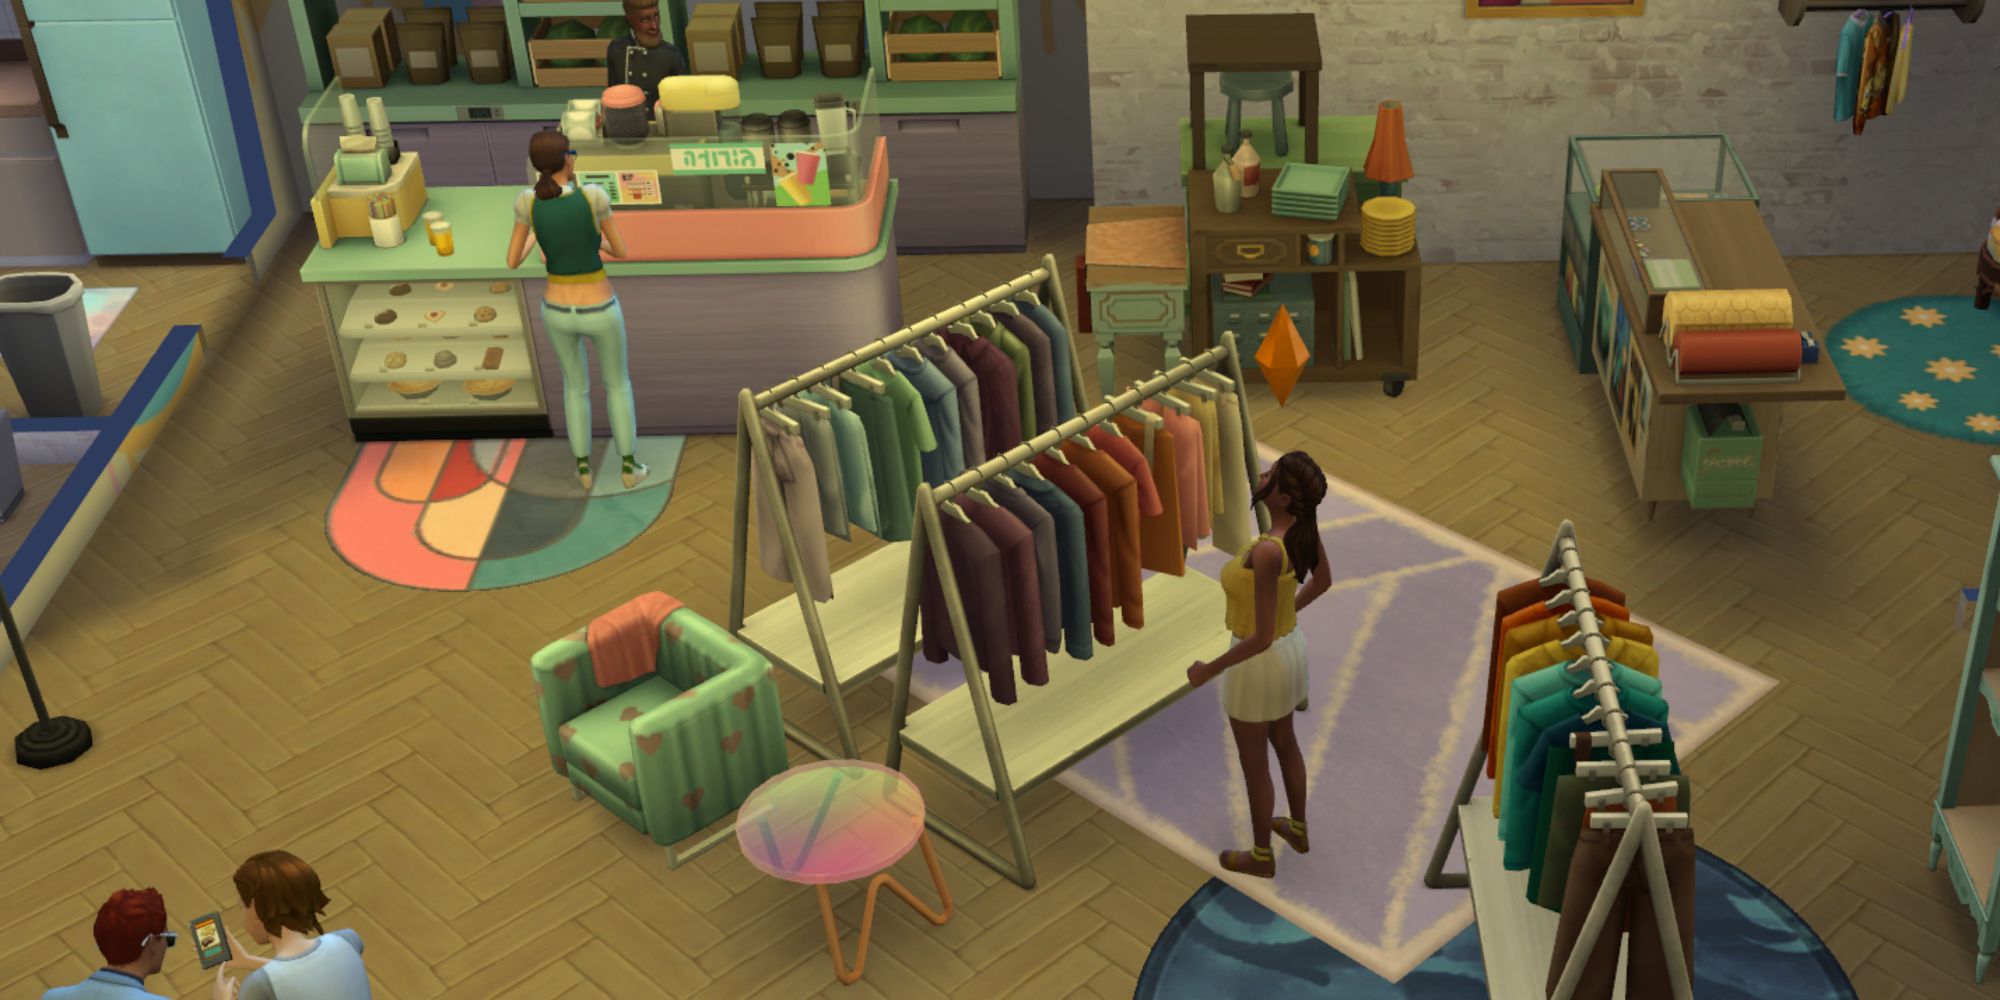 Some Sims in a Tea Shop, talking to each other and looking into clothes.